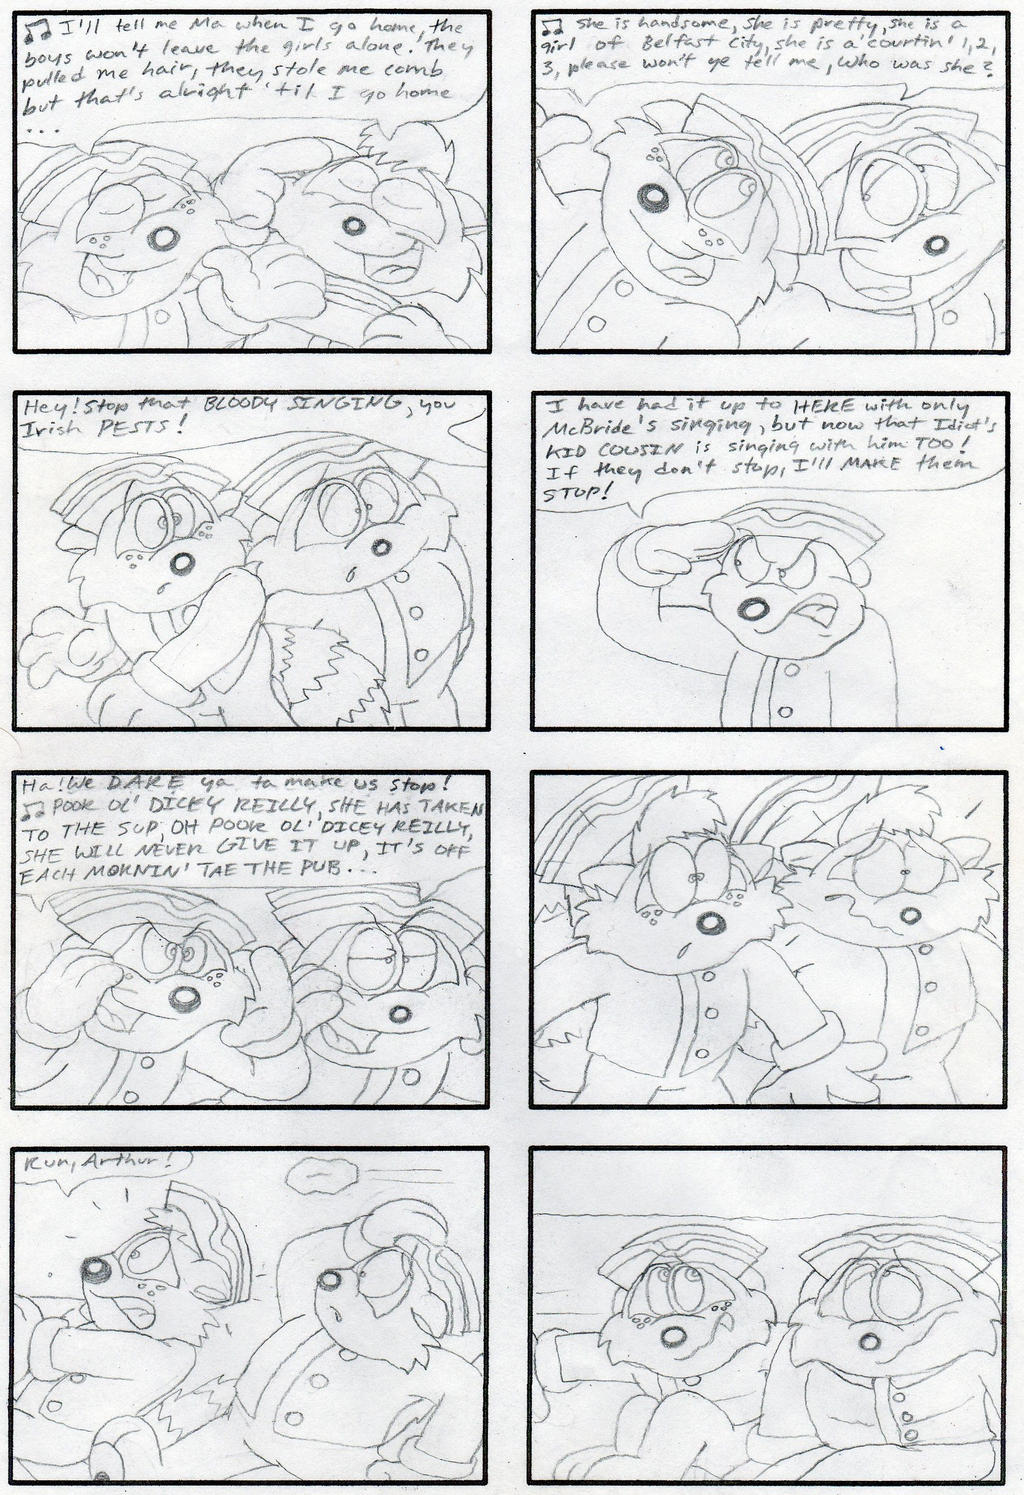 Richards The Rat Page 1